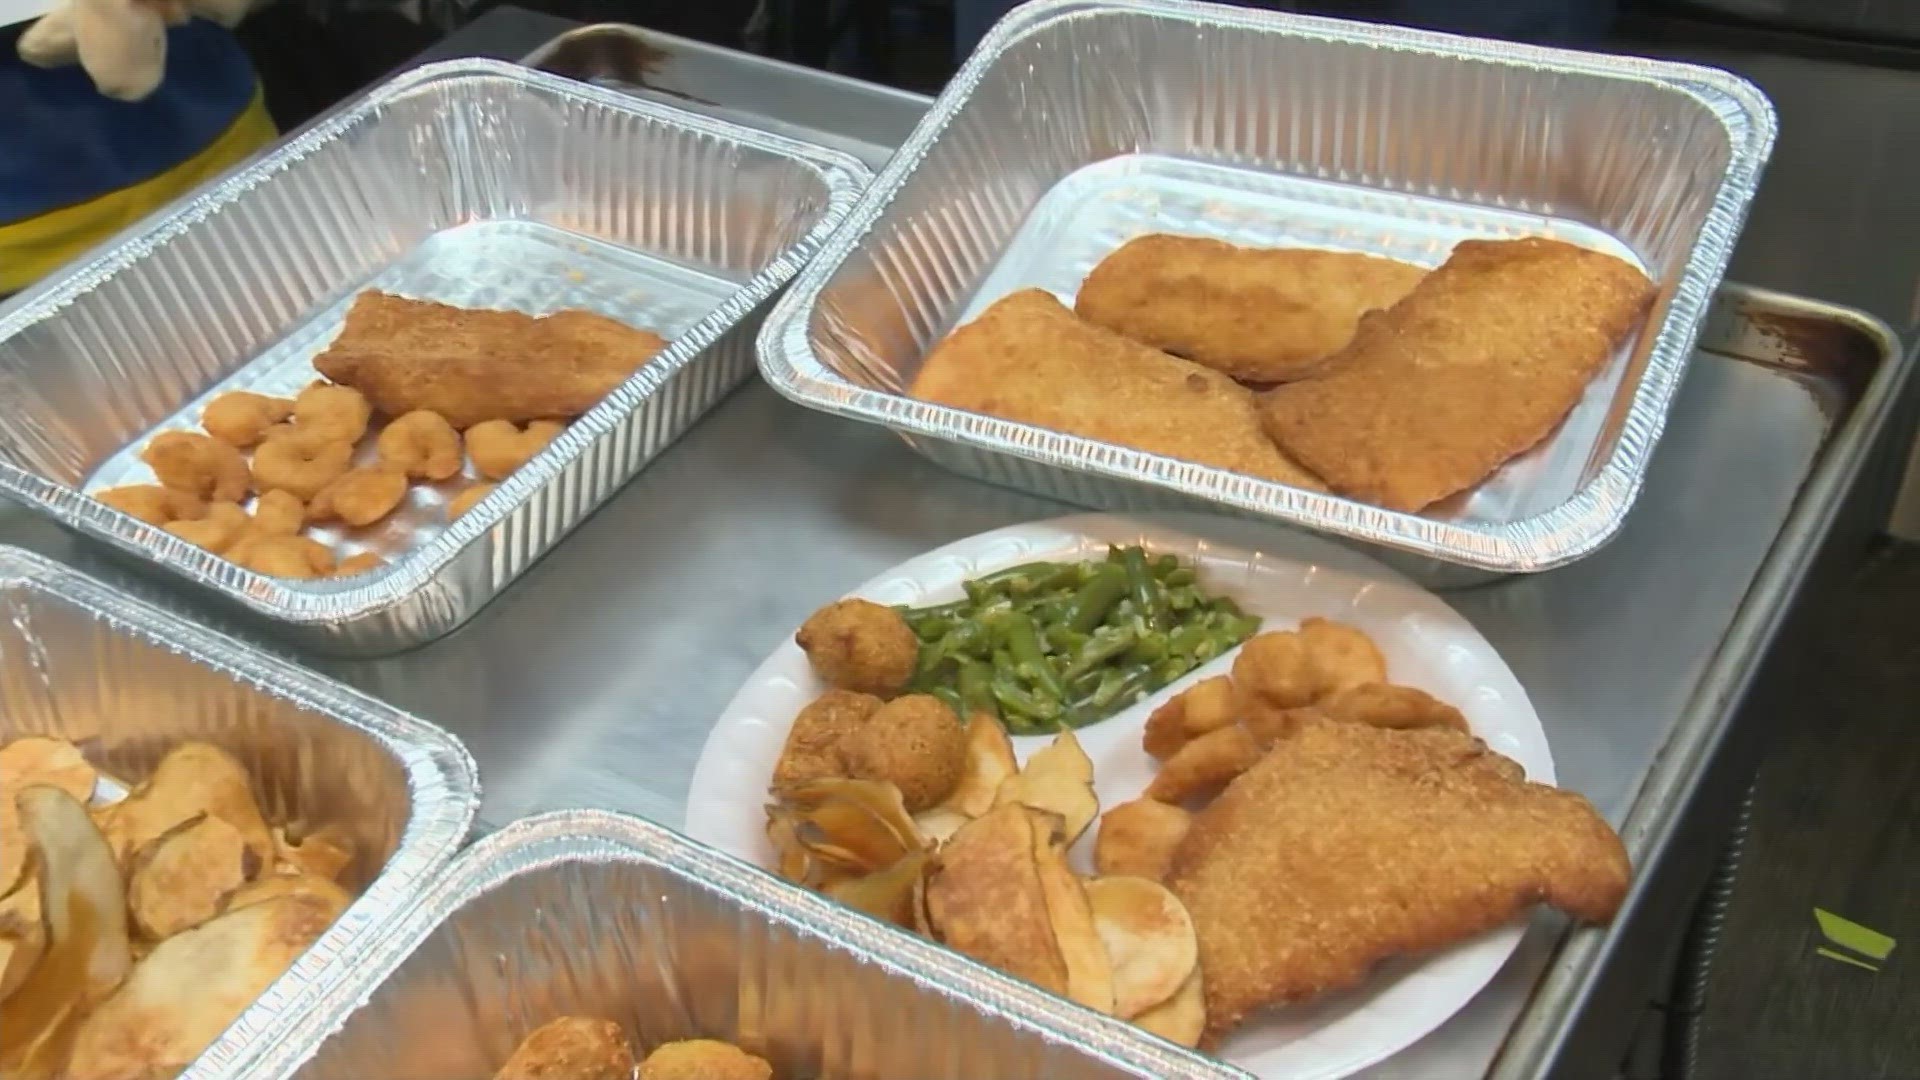 Jim Stratman is visiting a new parish every week for Fish Fry Friday during lent.